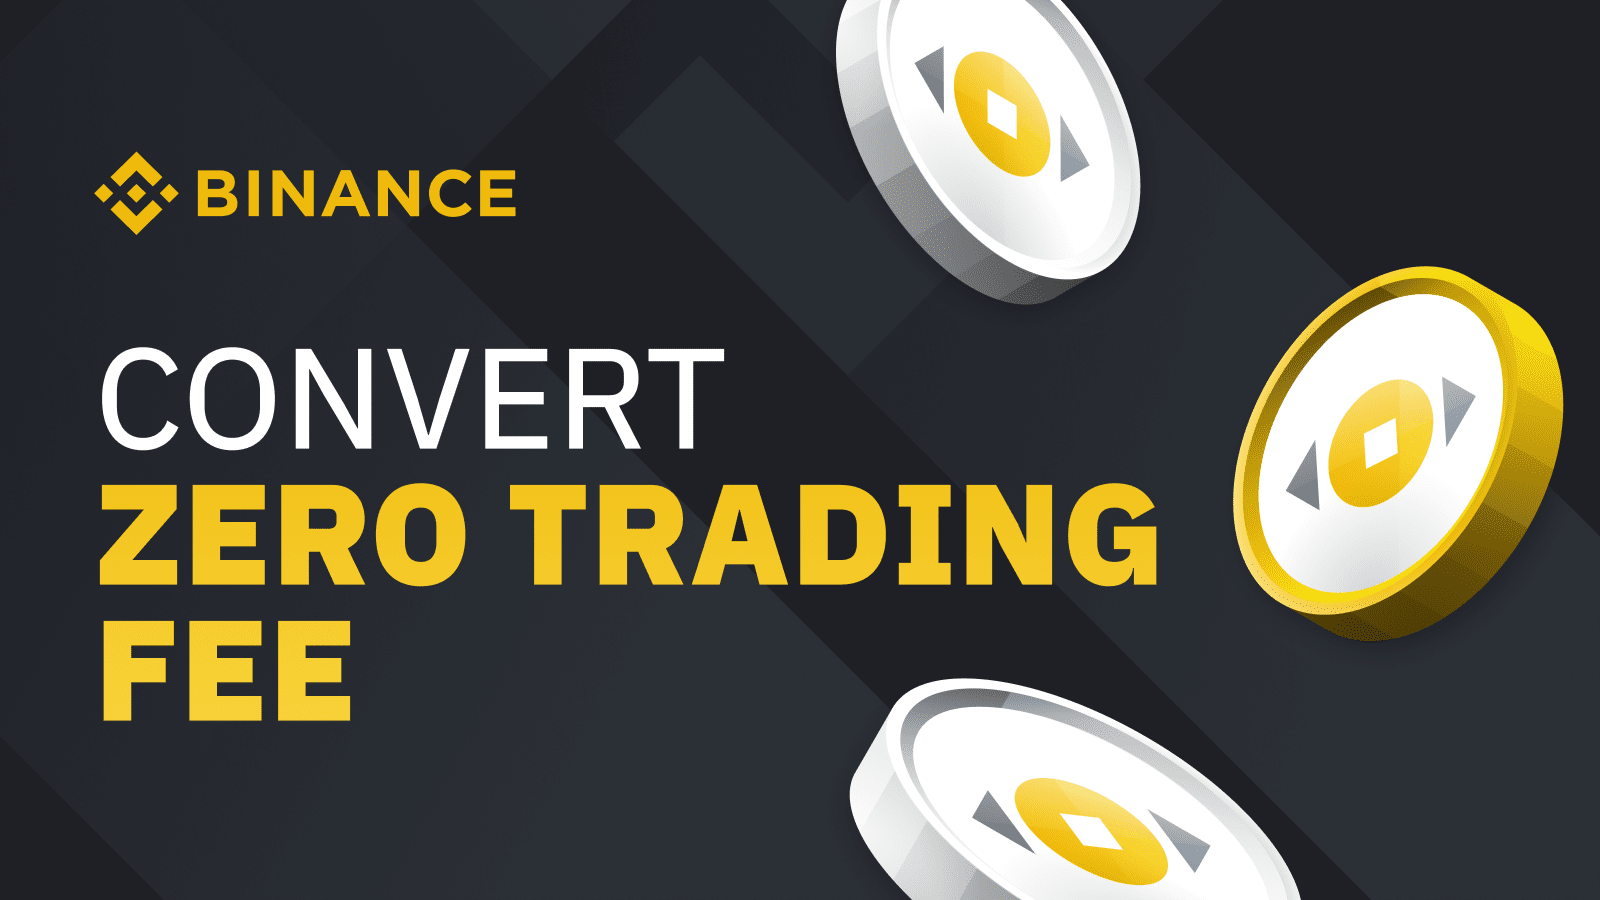 Binance users can convert LUNC and USTC to all cryptos